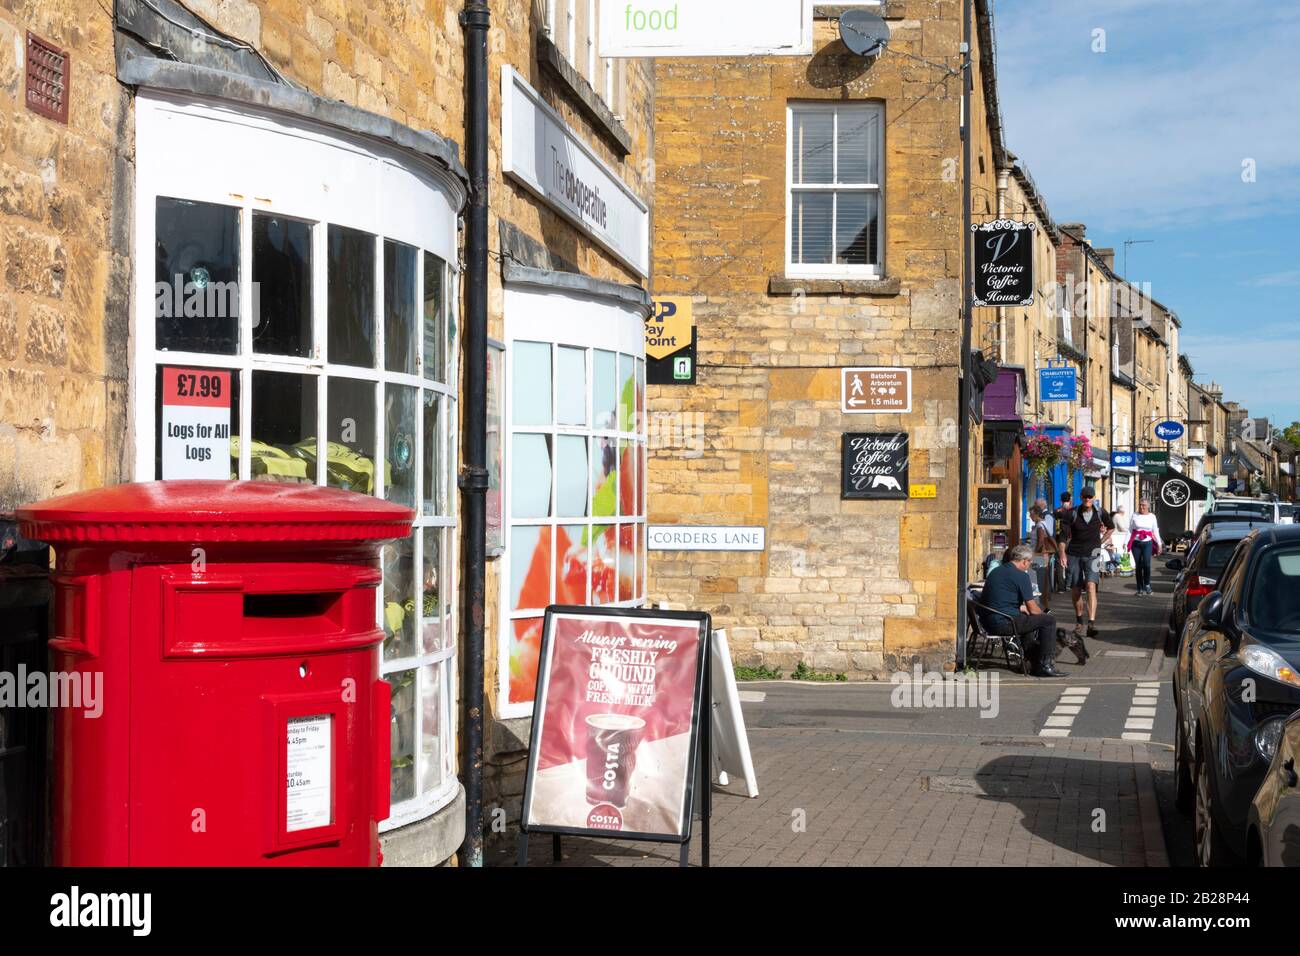 Shops and mail box in High Street, Moreton in the Marsh, Cotswolds, Gloucestershire, England Stock Photo